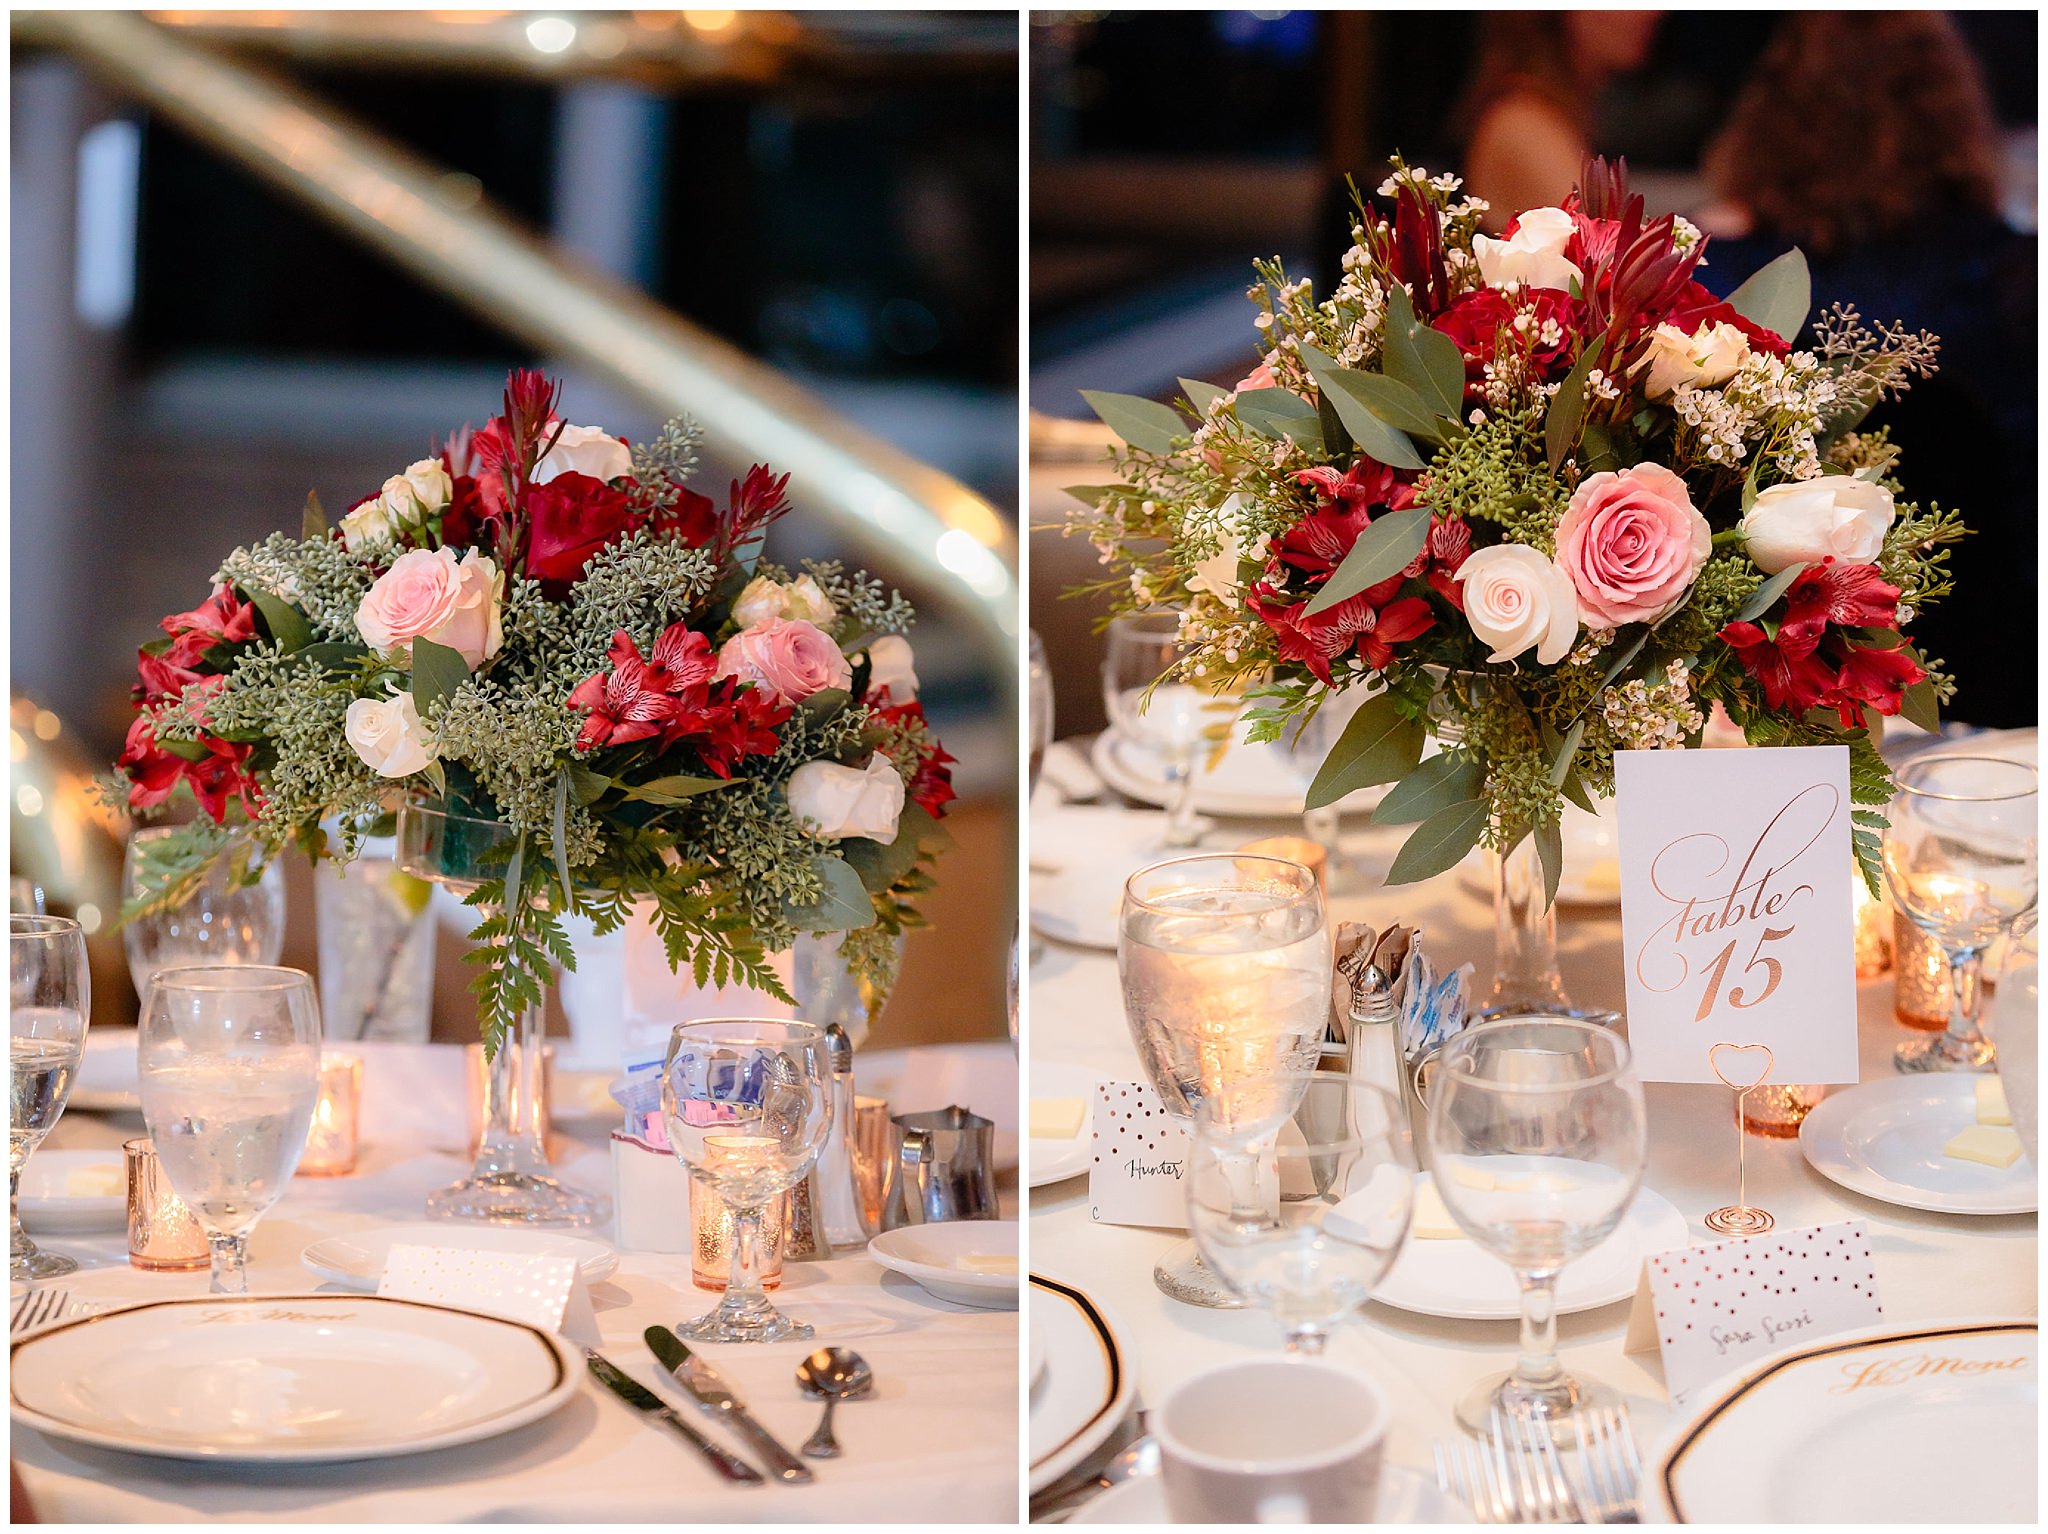 Floral centerpieces by Wallace Bethel Park Flowers at a LeMont wedding